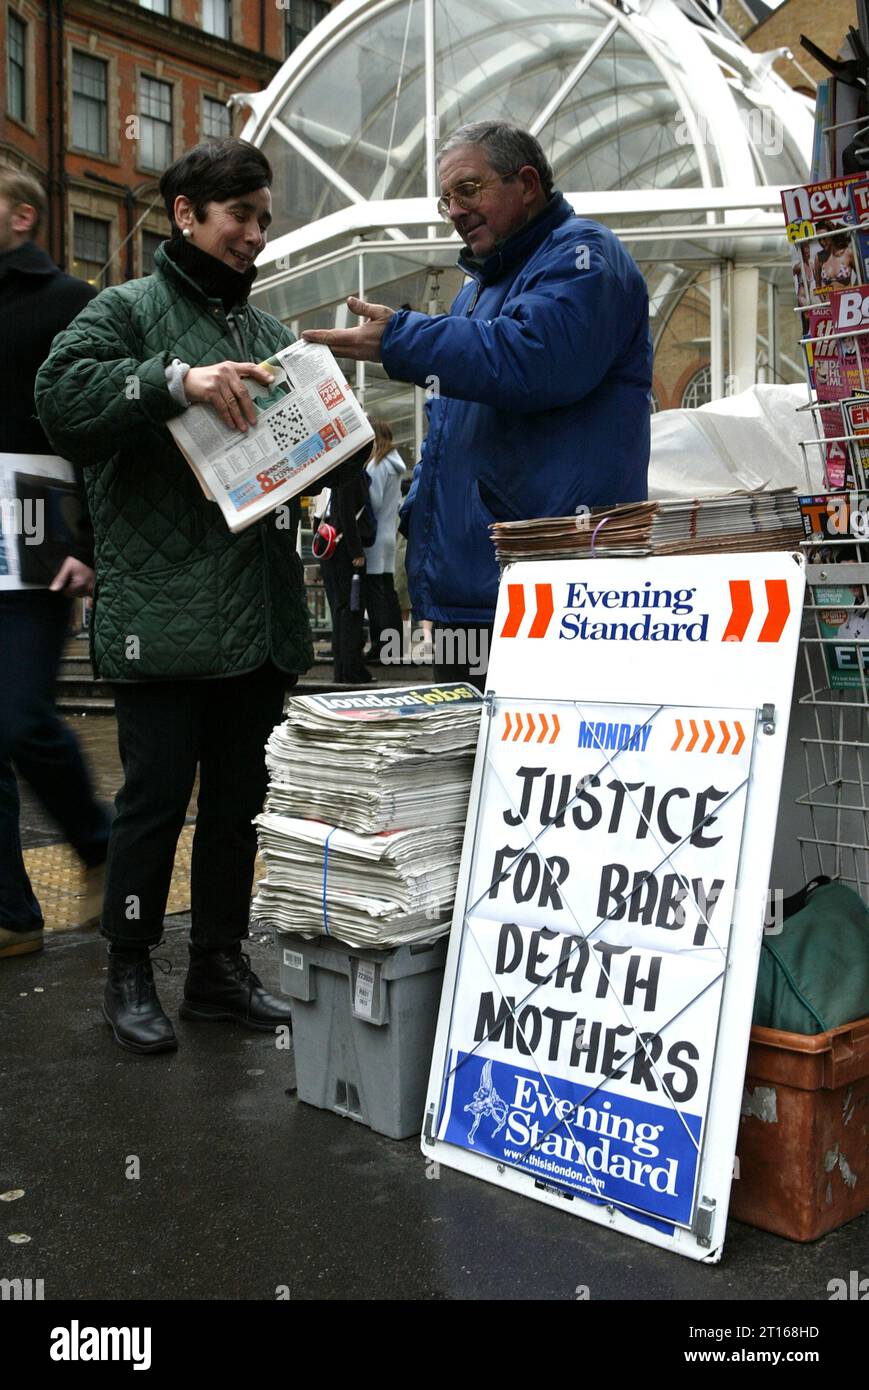 Evening Standard newspaper stand in London in 2004 Stock Photo